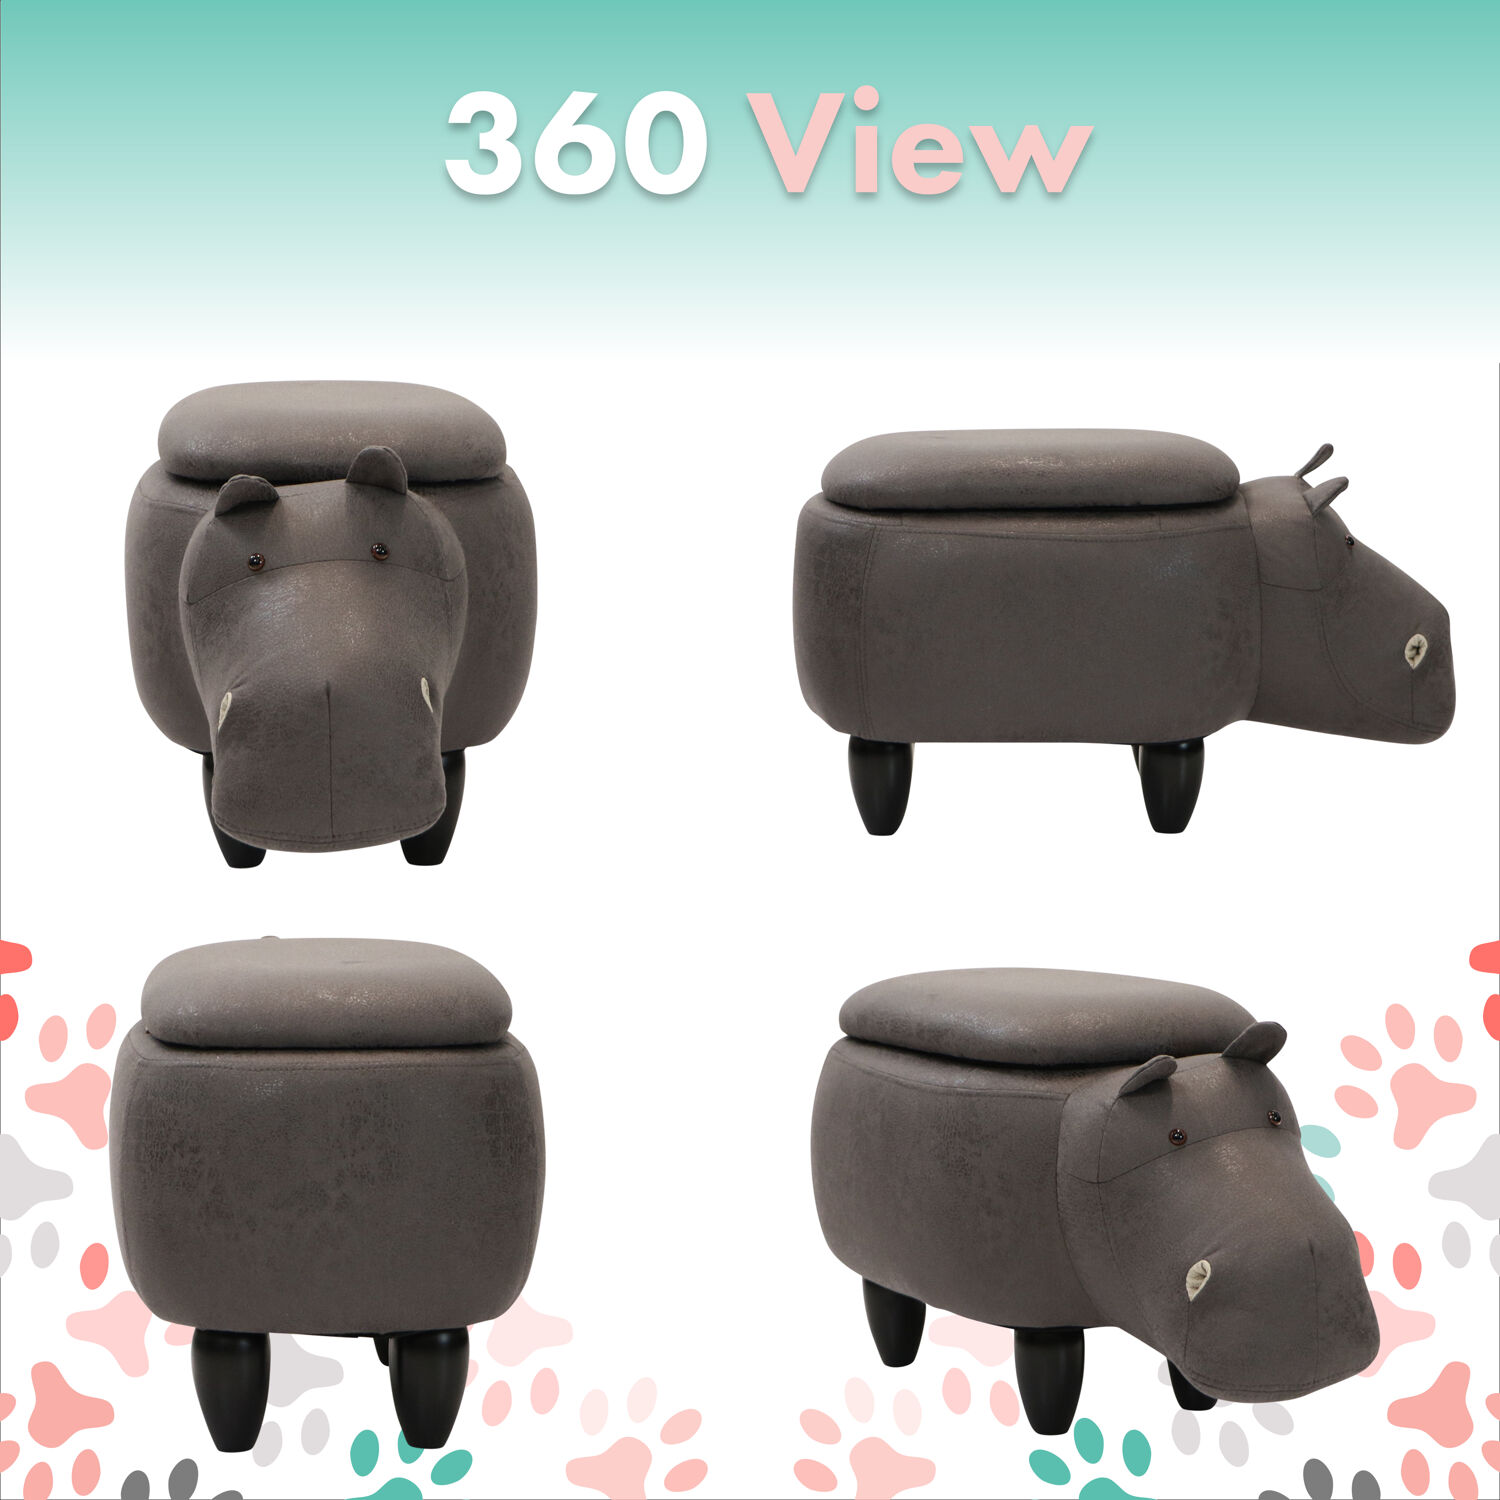 Critter Sitters 15-In. Seat Height Dark Gray Hippo Animal Shape Storage Ottoman - Furniture for Nursery, Bedroom, Playroom, and Living Room Decor - image 3 of 19